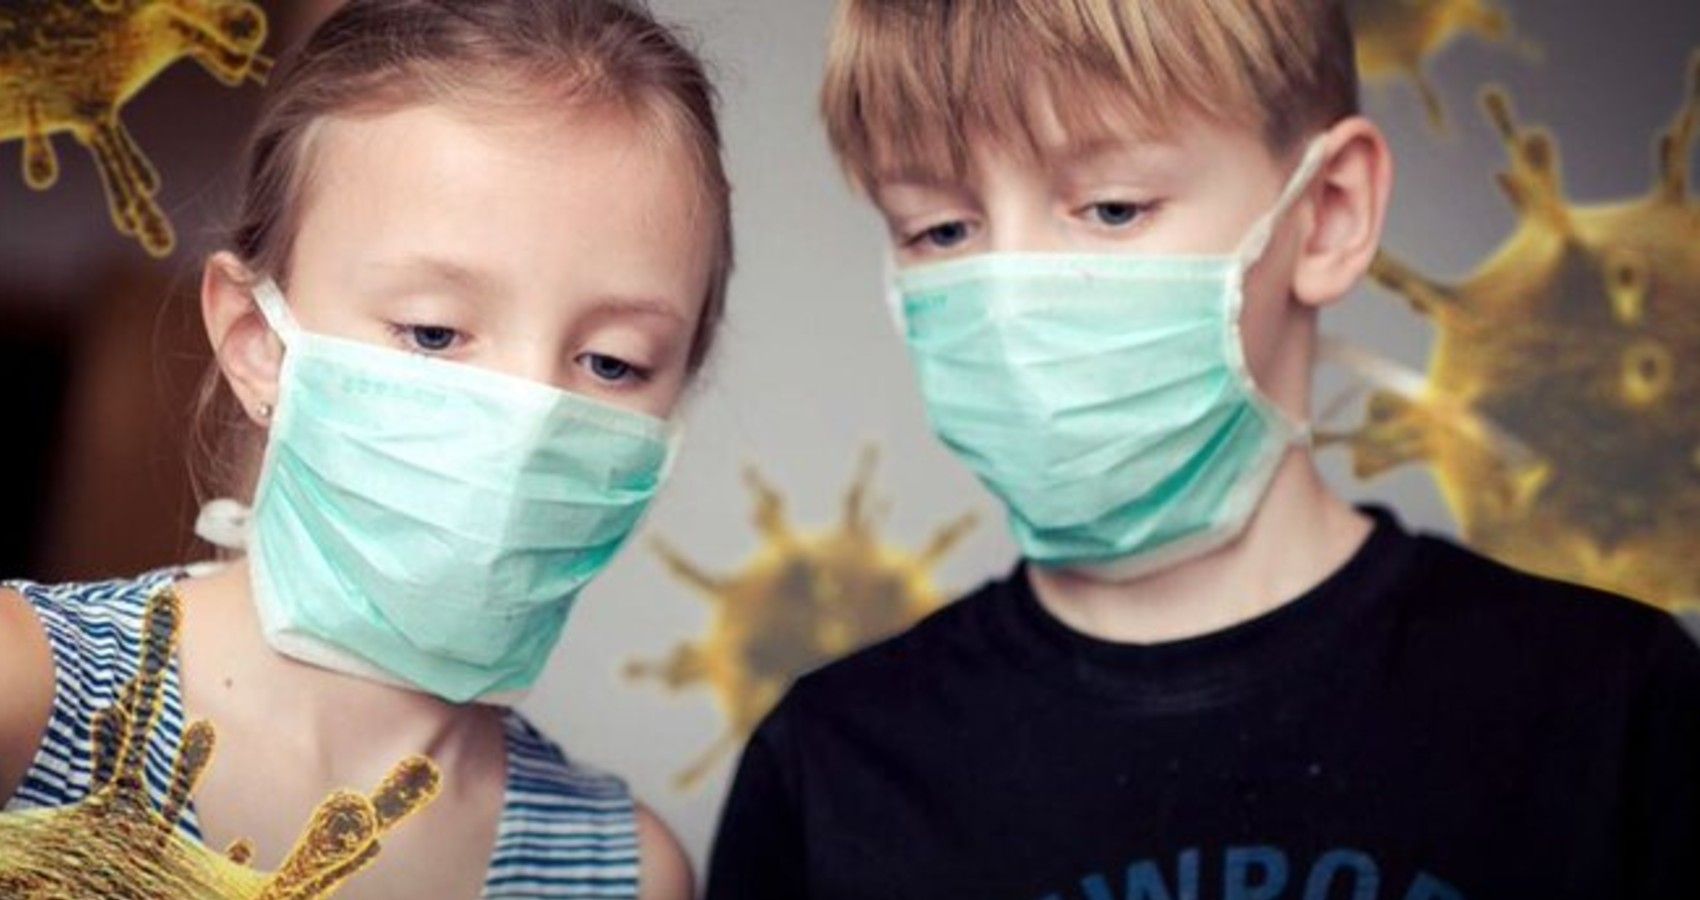 Children wearing face masks with the virus floating aroung them